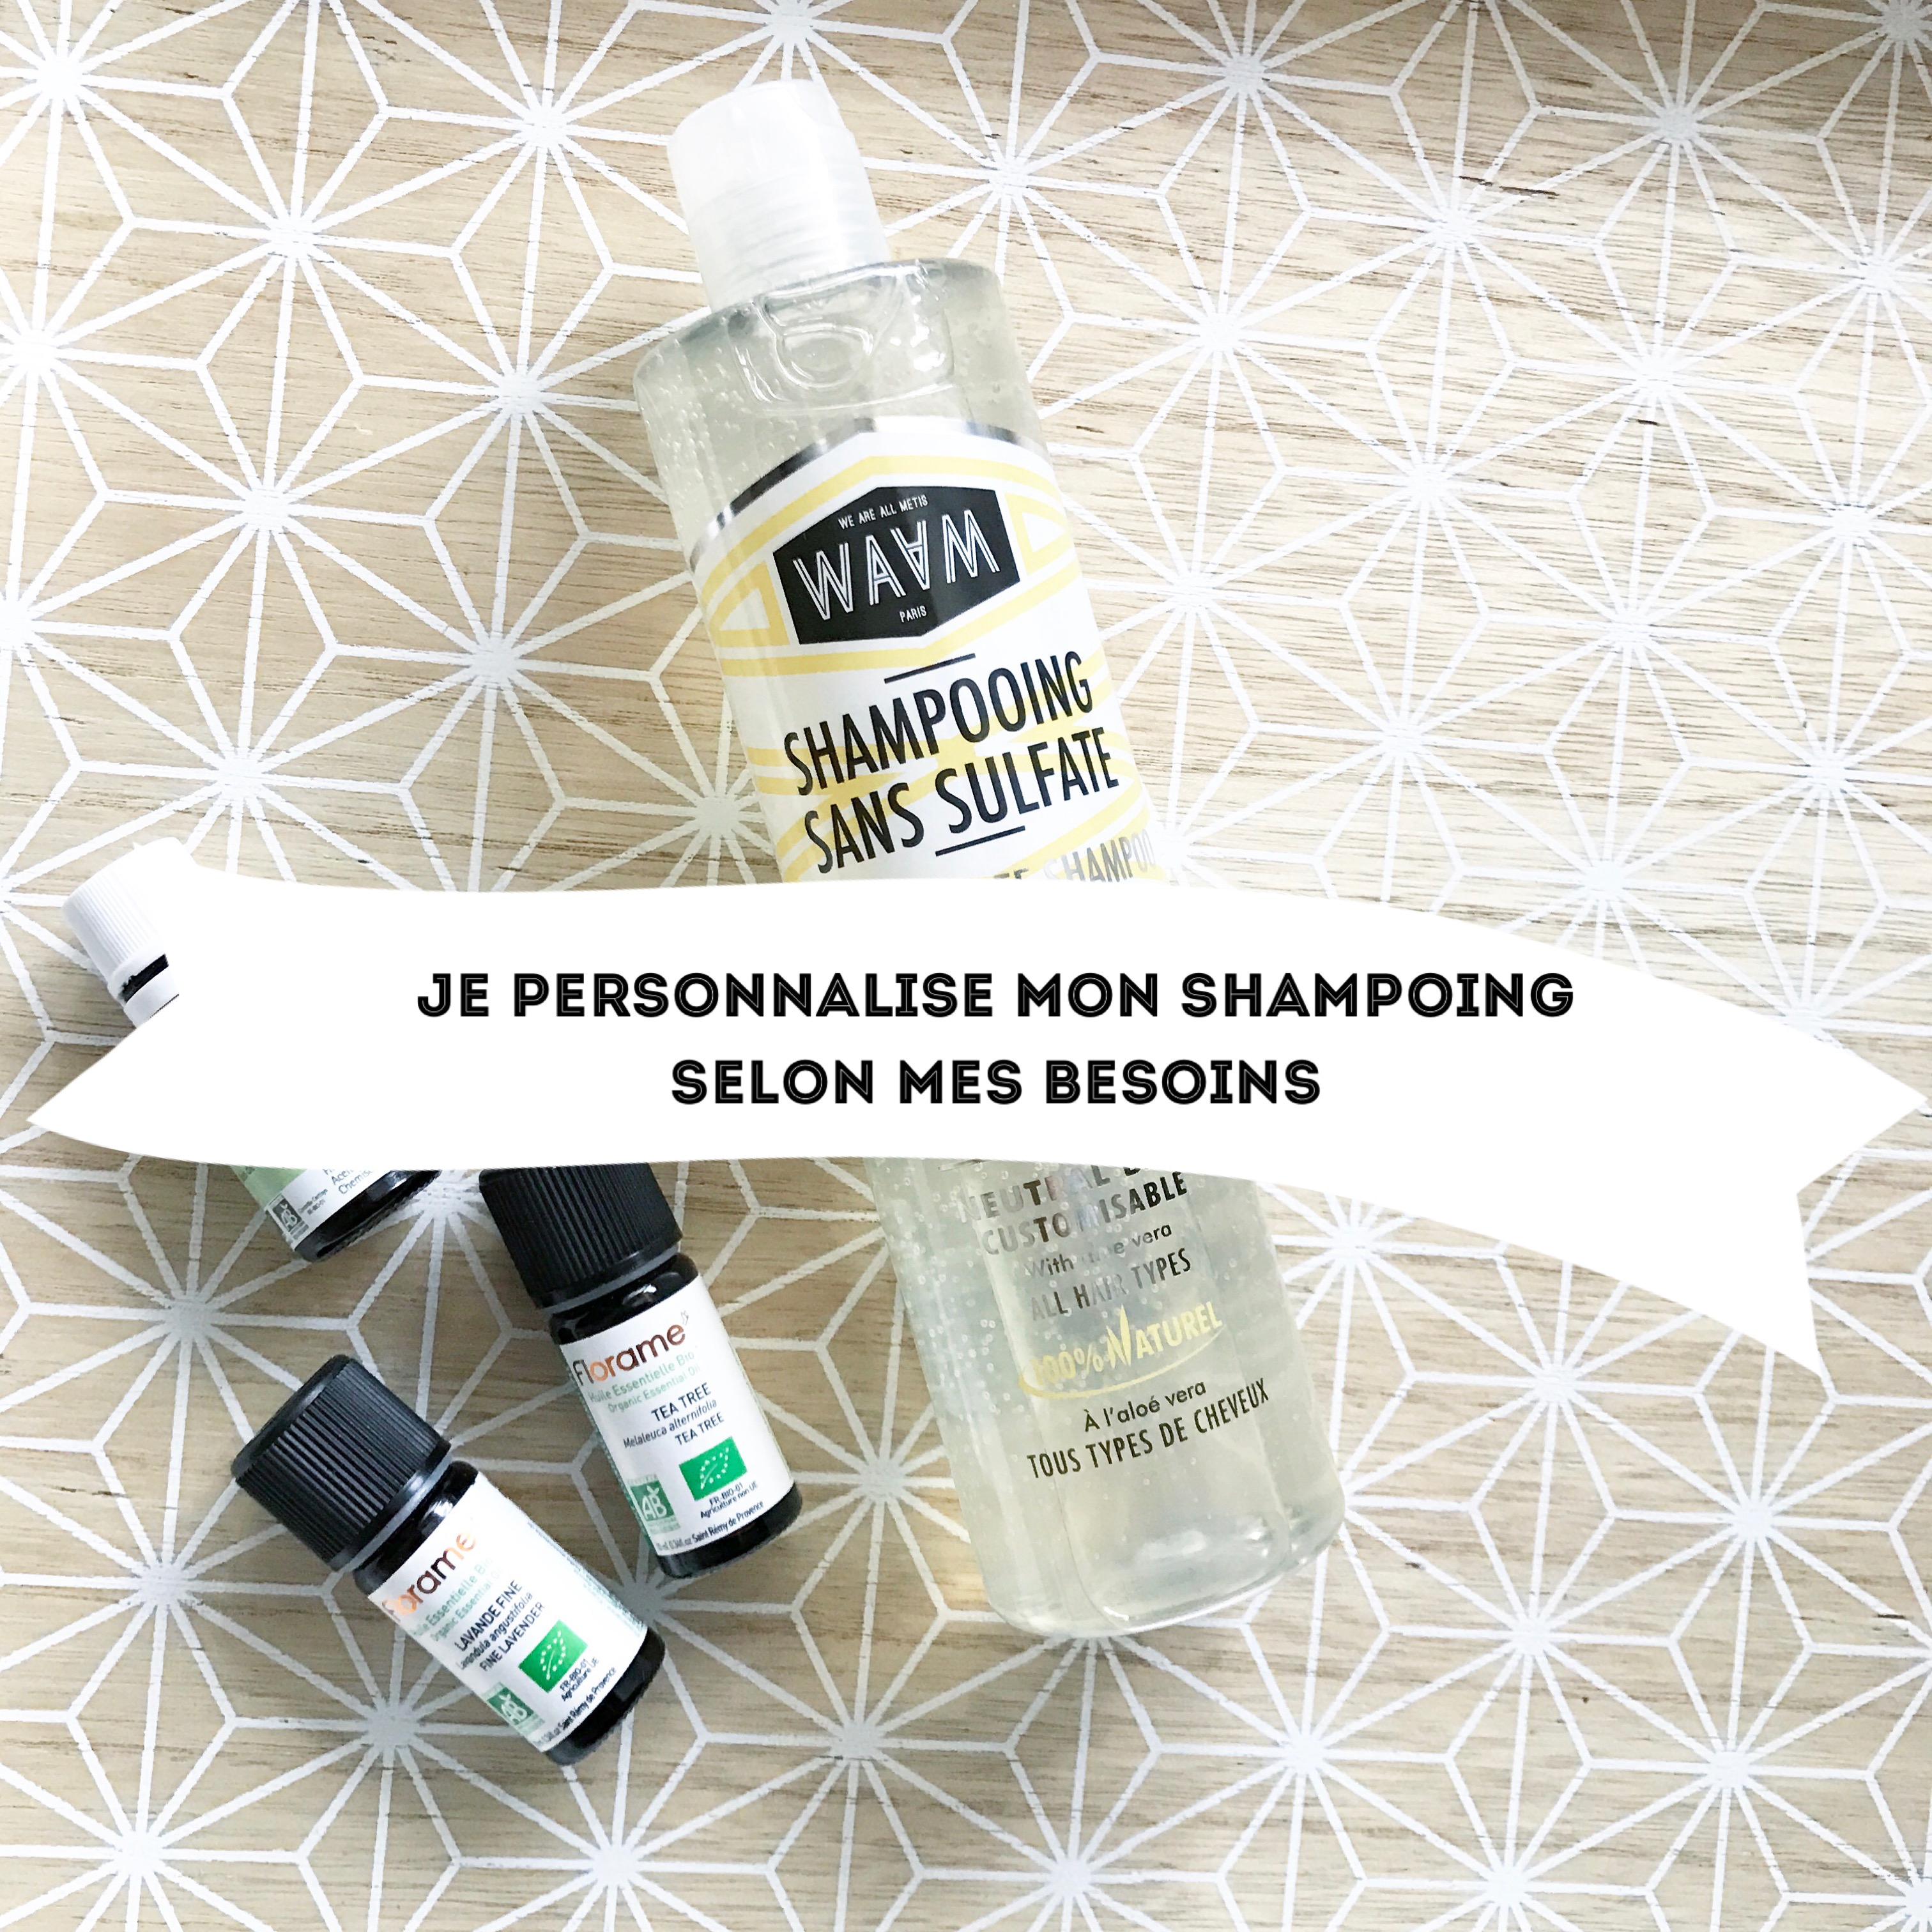 Je personnalise mon shampoing selon mes besoins